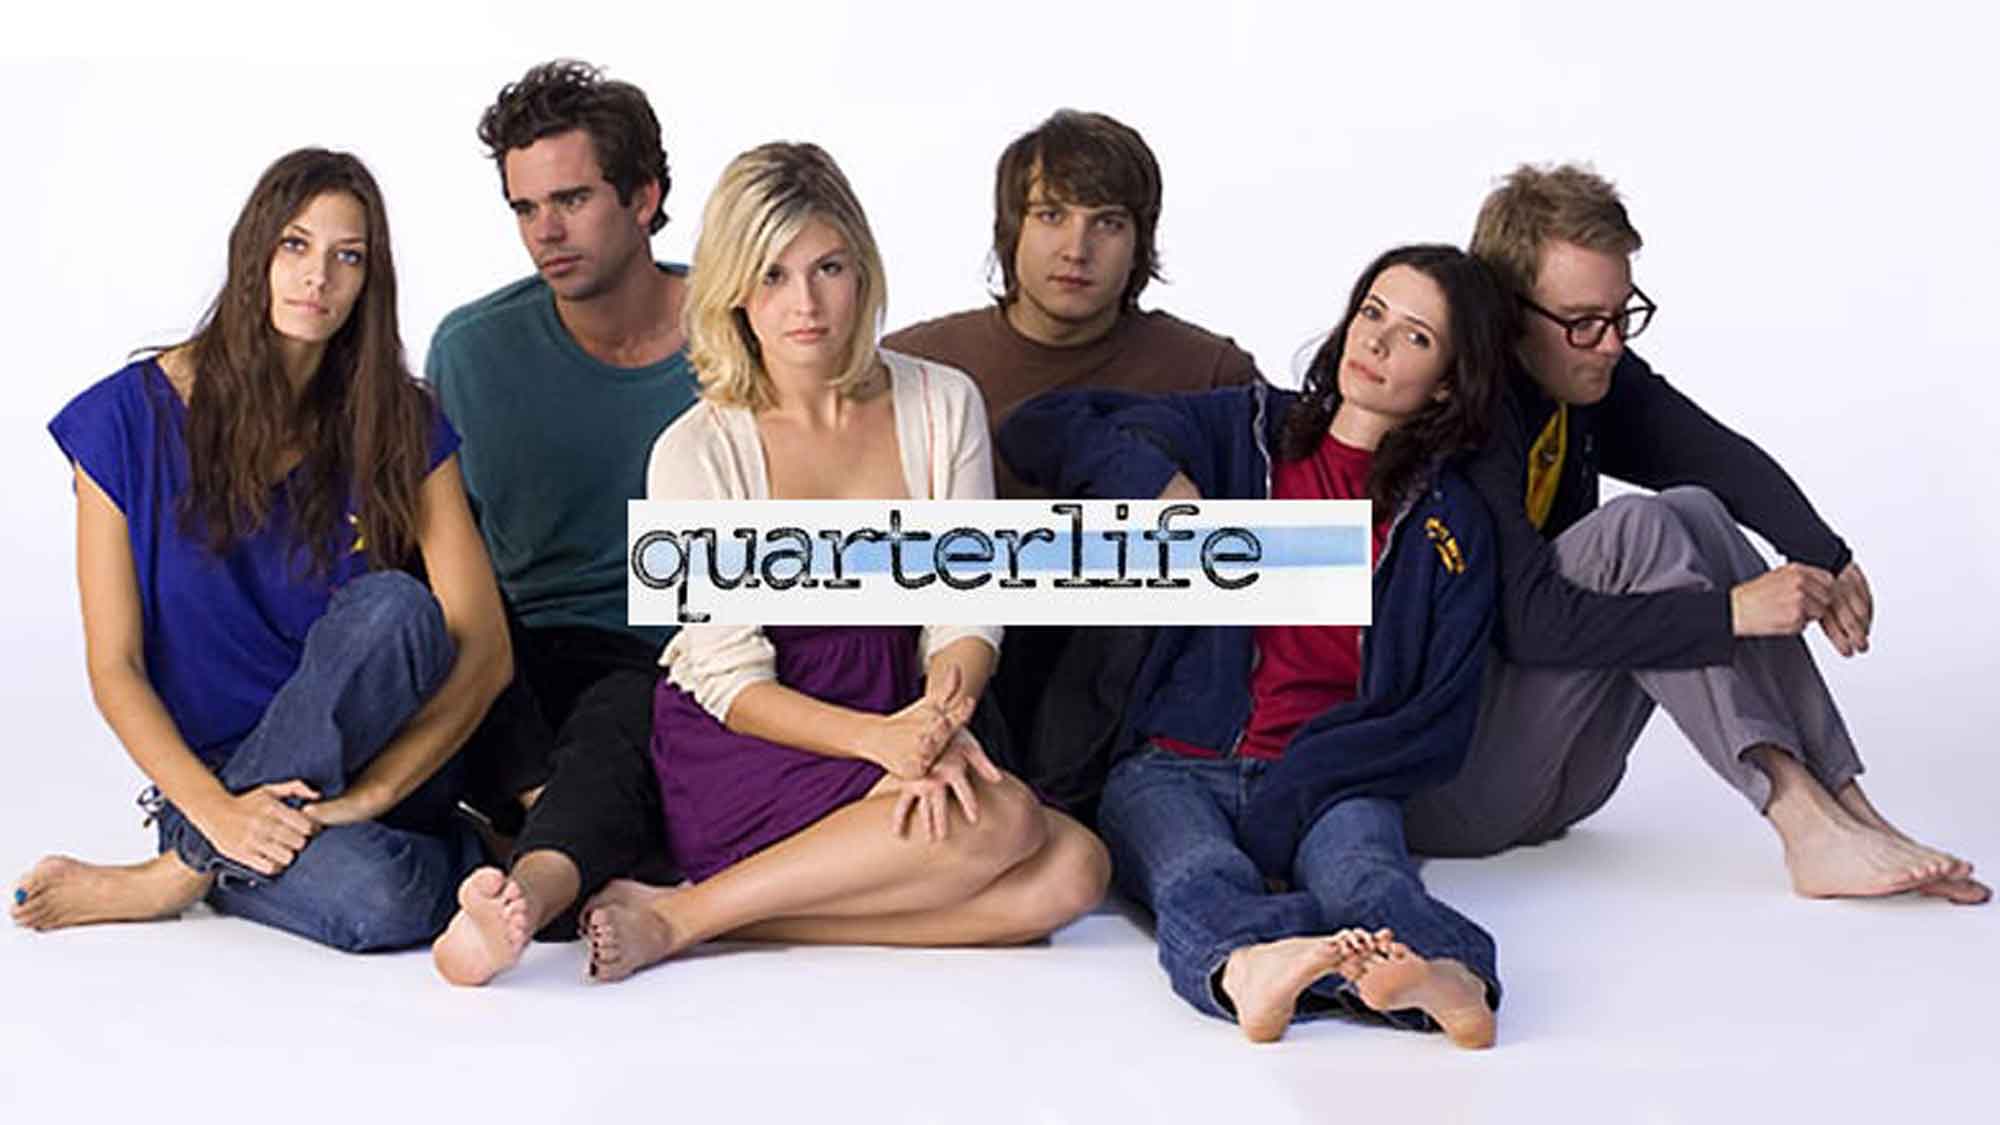 Quarterlife TV Show Gets An Official Premiere Date From NBC (2008)